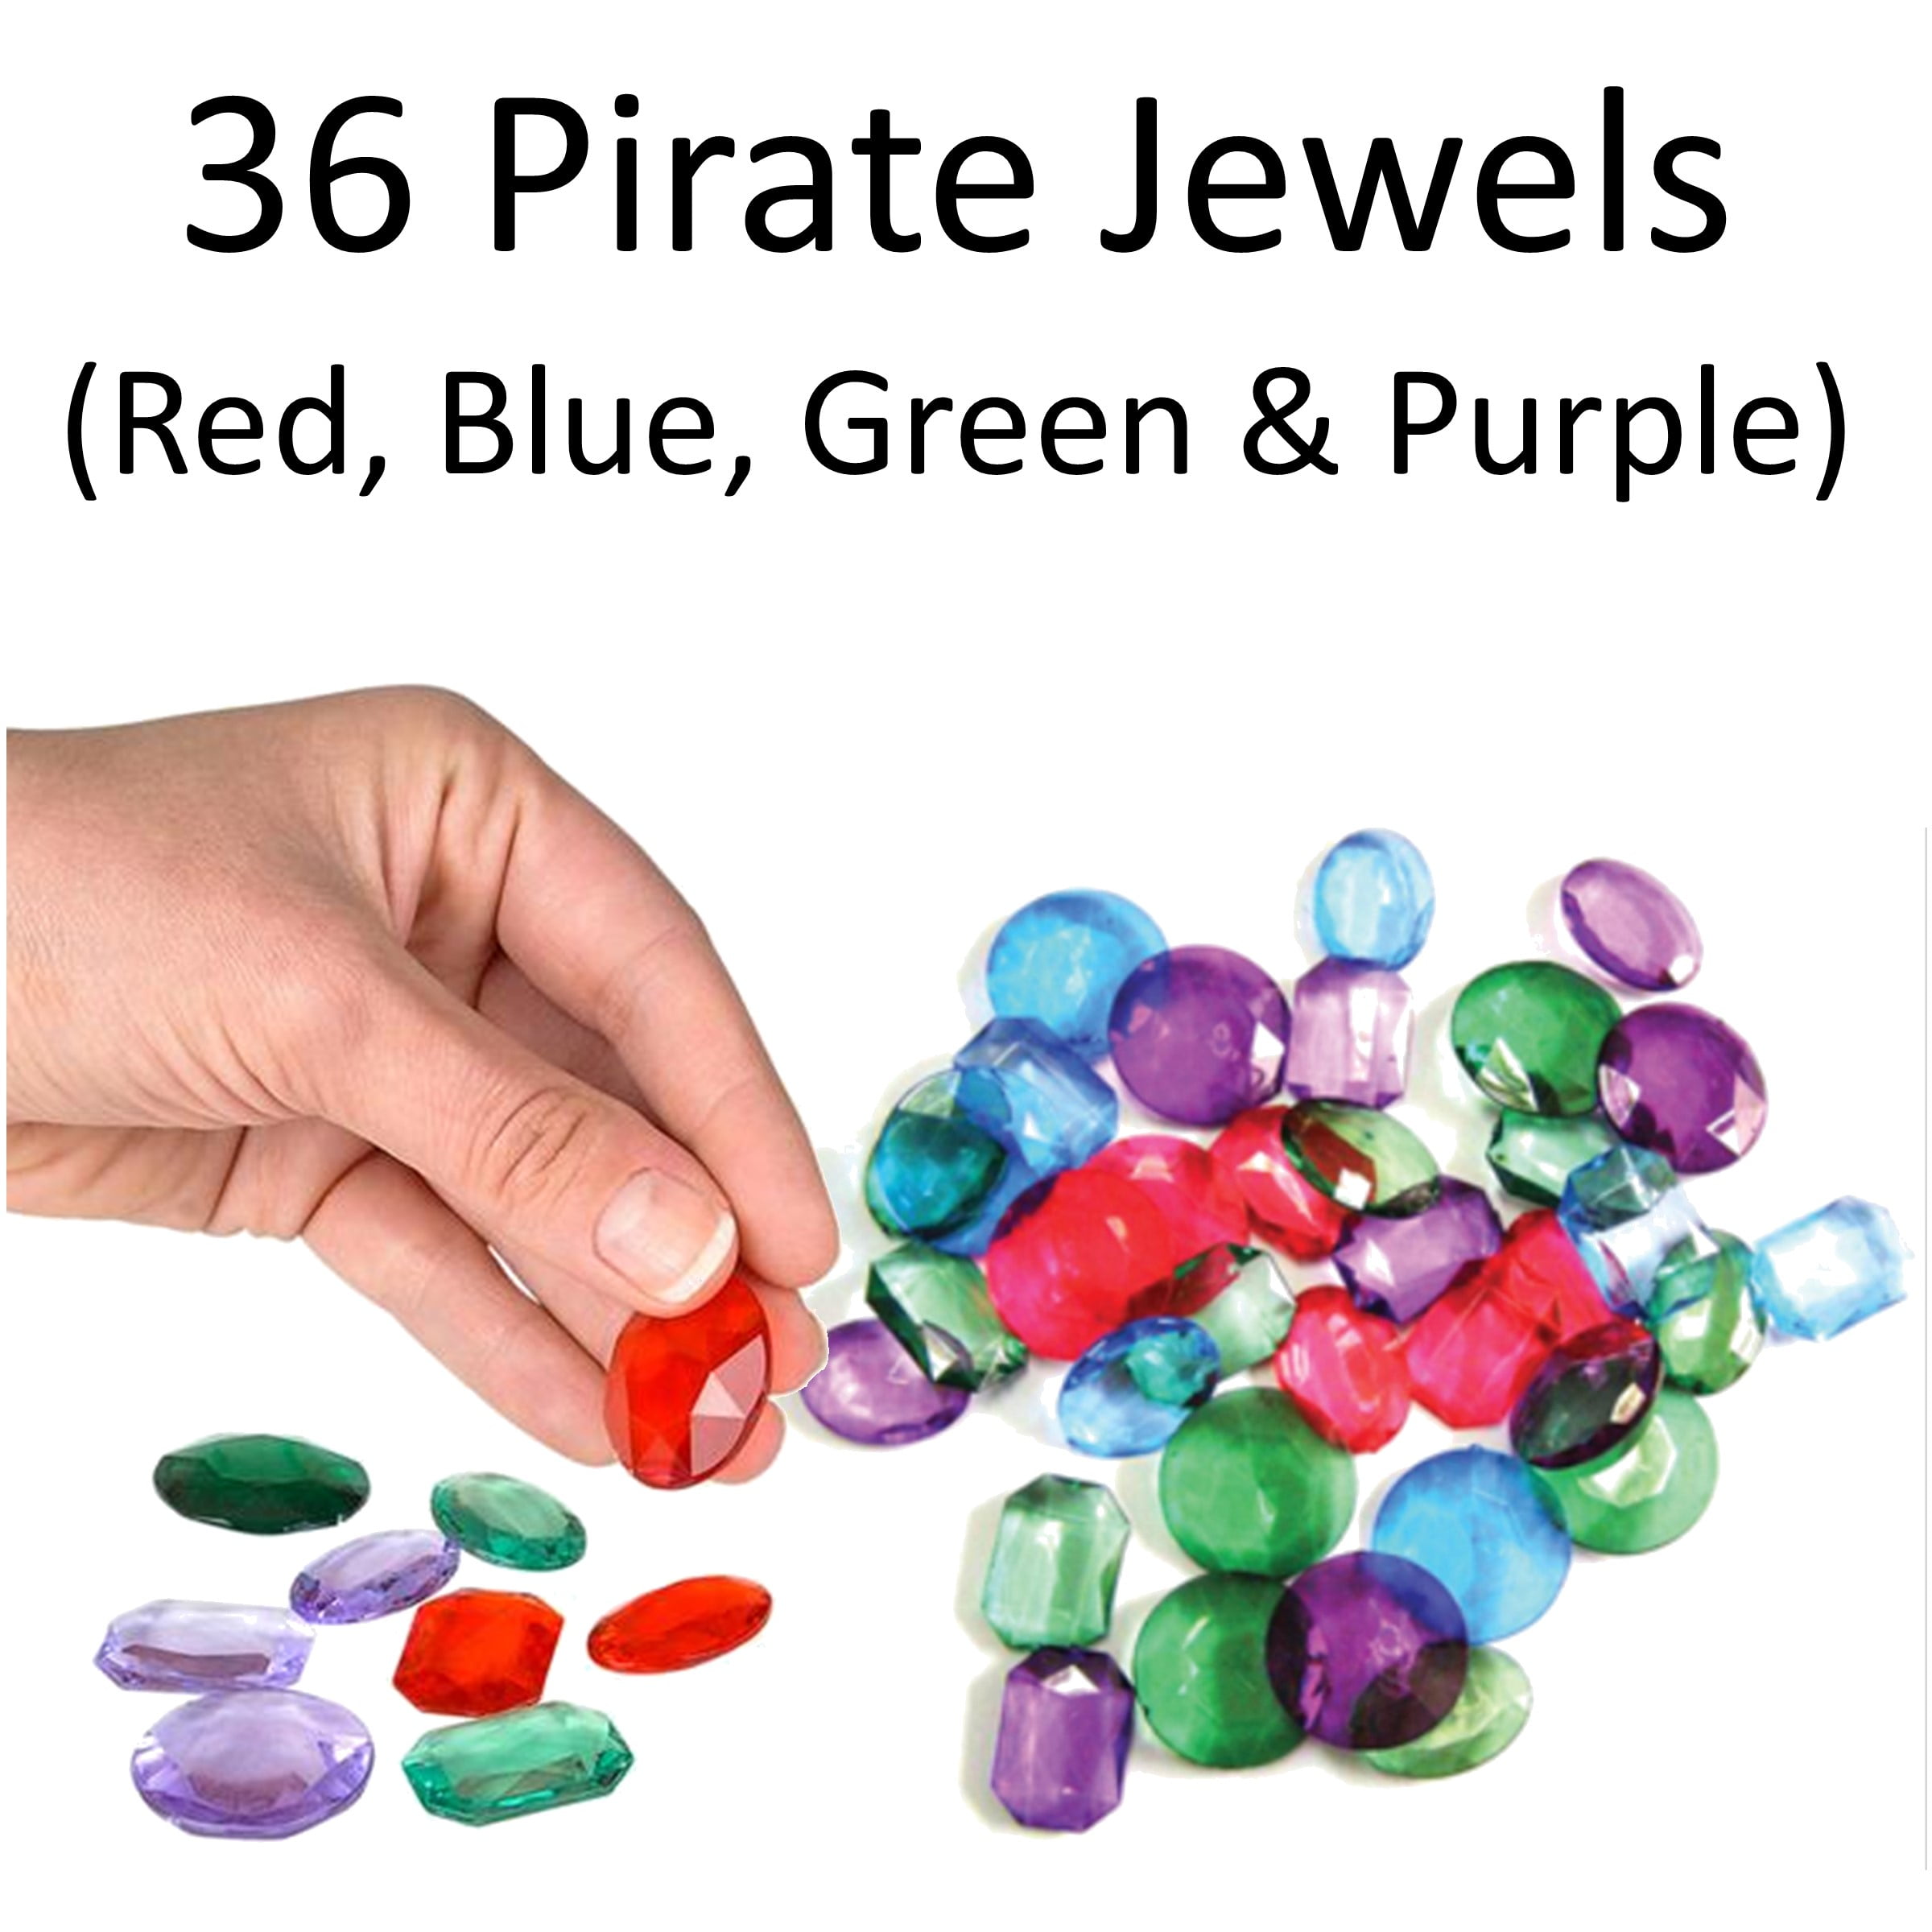 Assorted Colors Bulk Pirate Jewels and Gems 1 Pound Bag Approximately 160  Pieces, Treasure Jewels for Pirate Party Favors or Craft Decor 